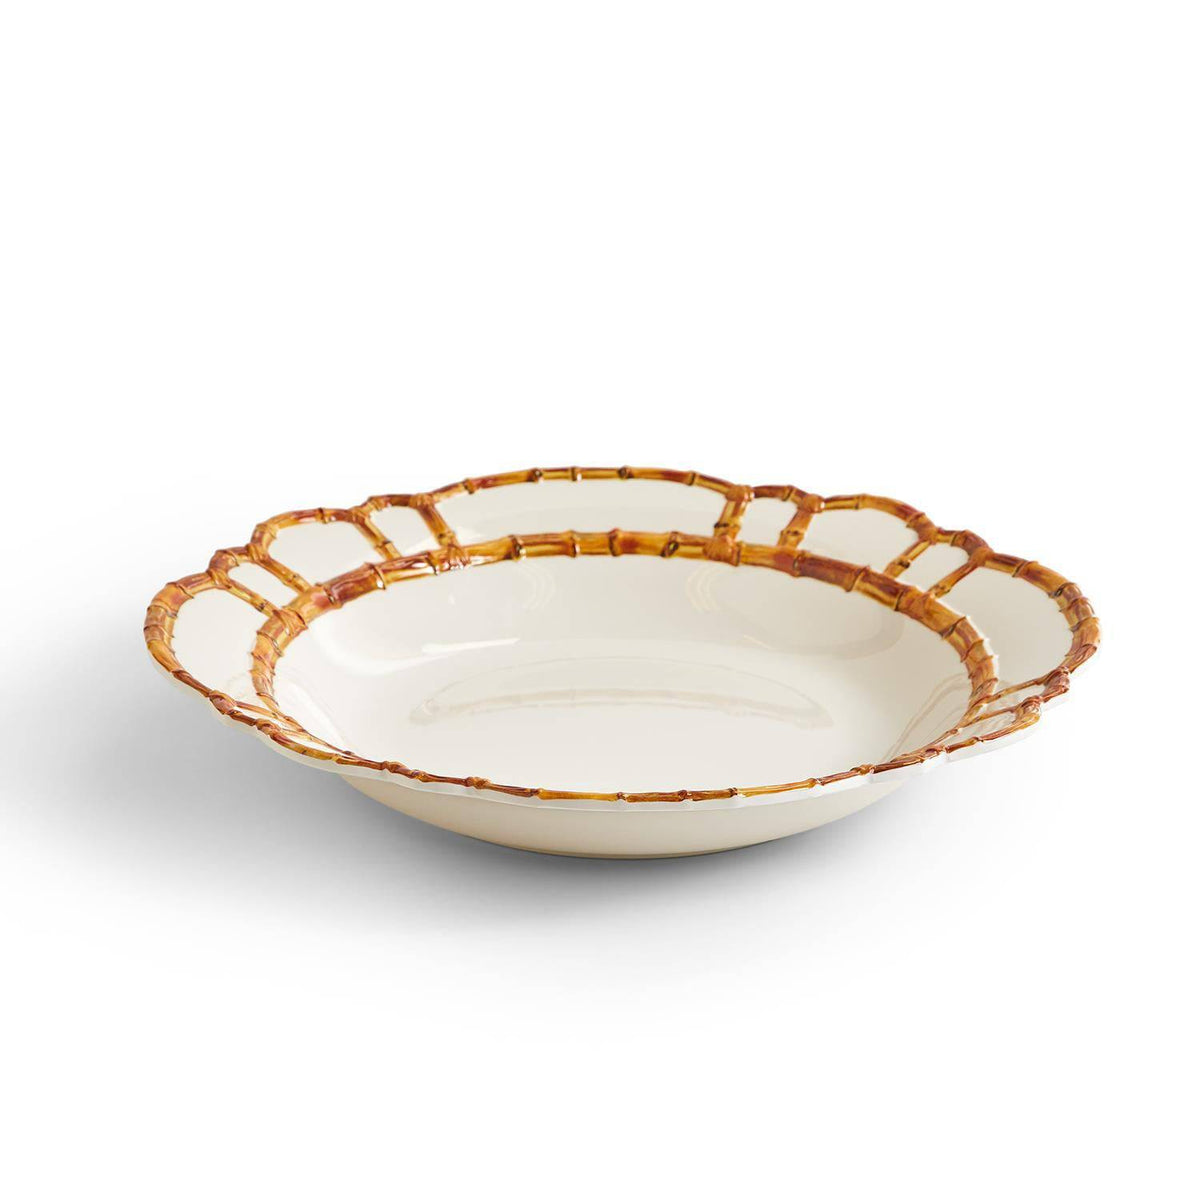 Bamboo Serving Bowl - The Preppy Bunny